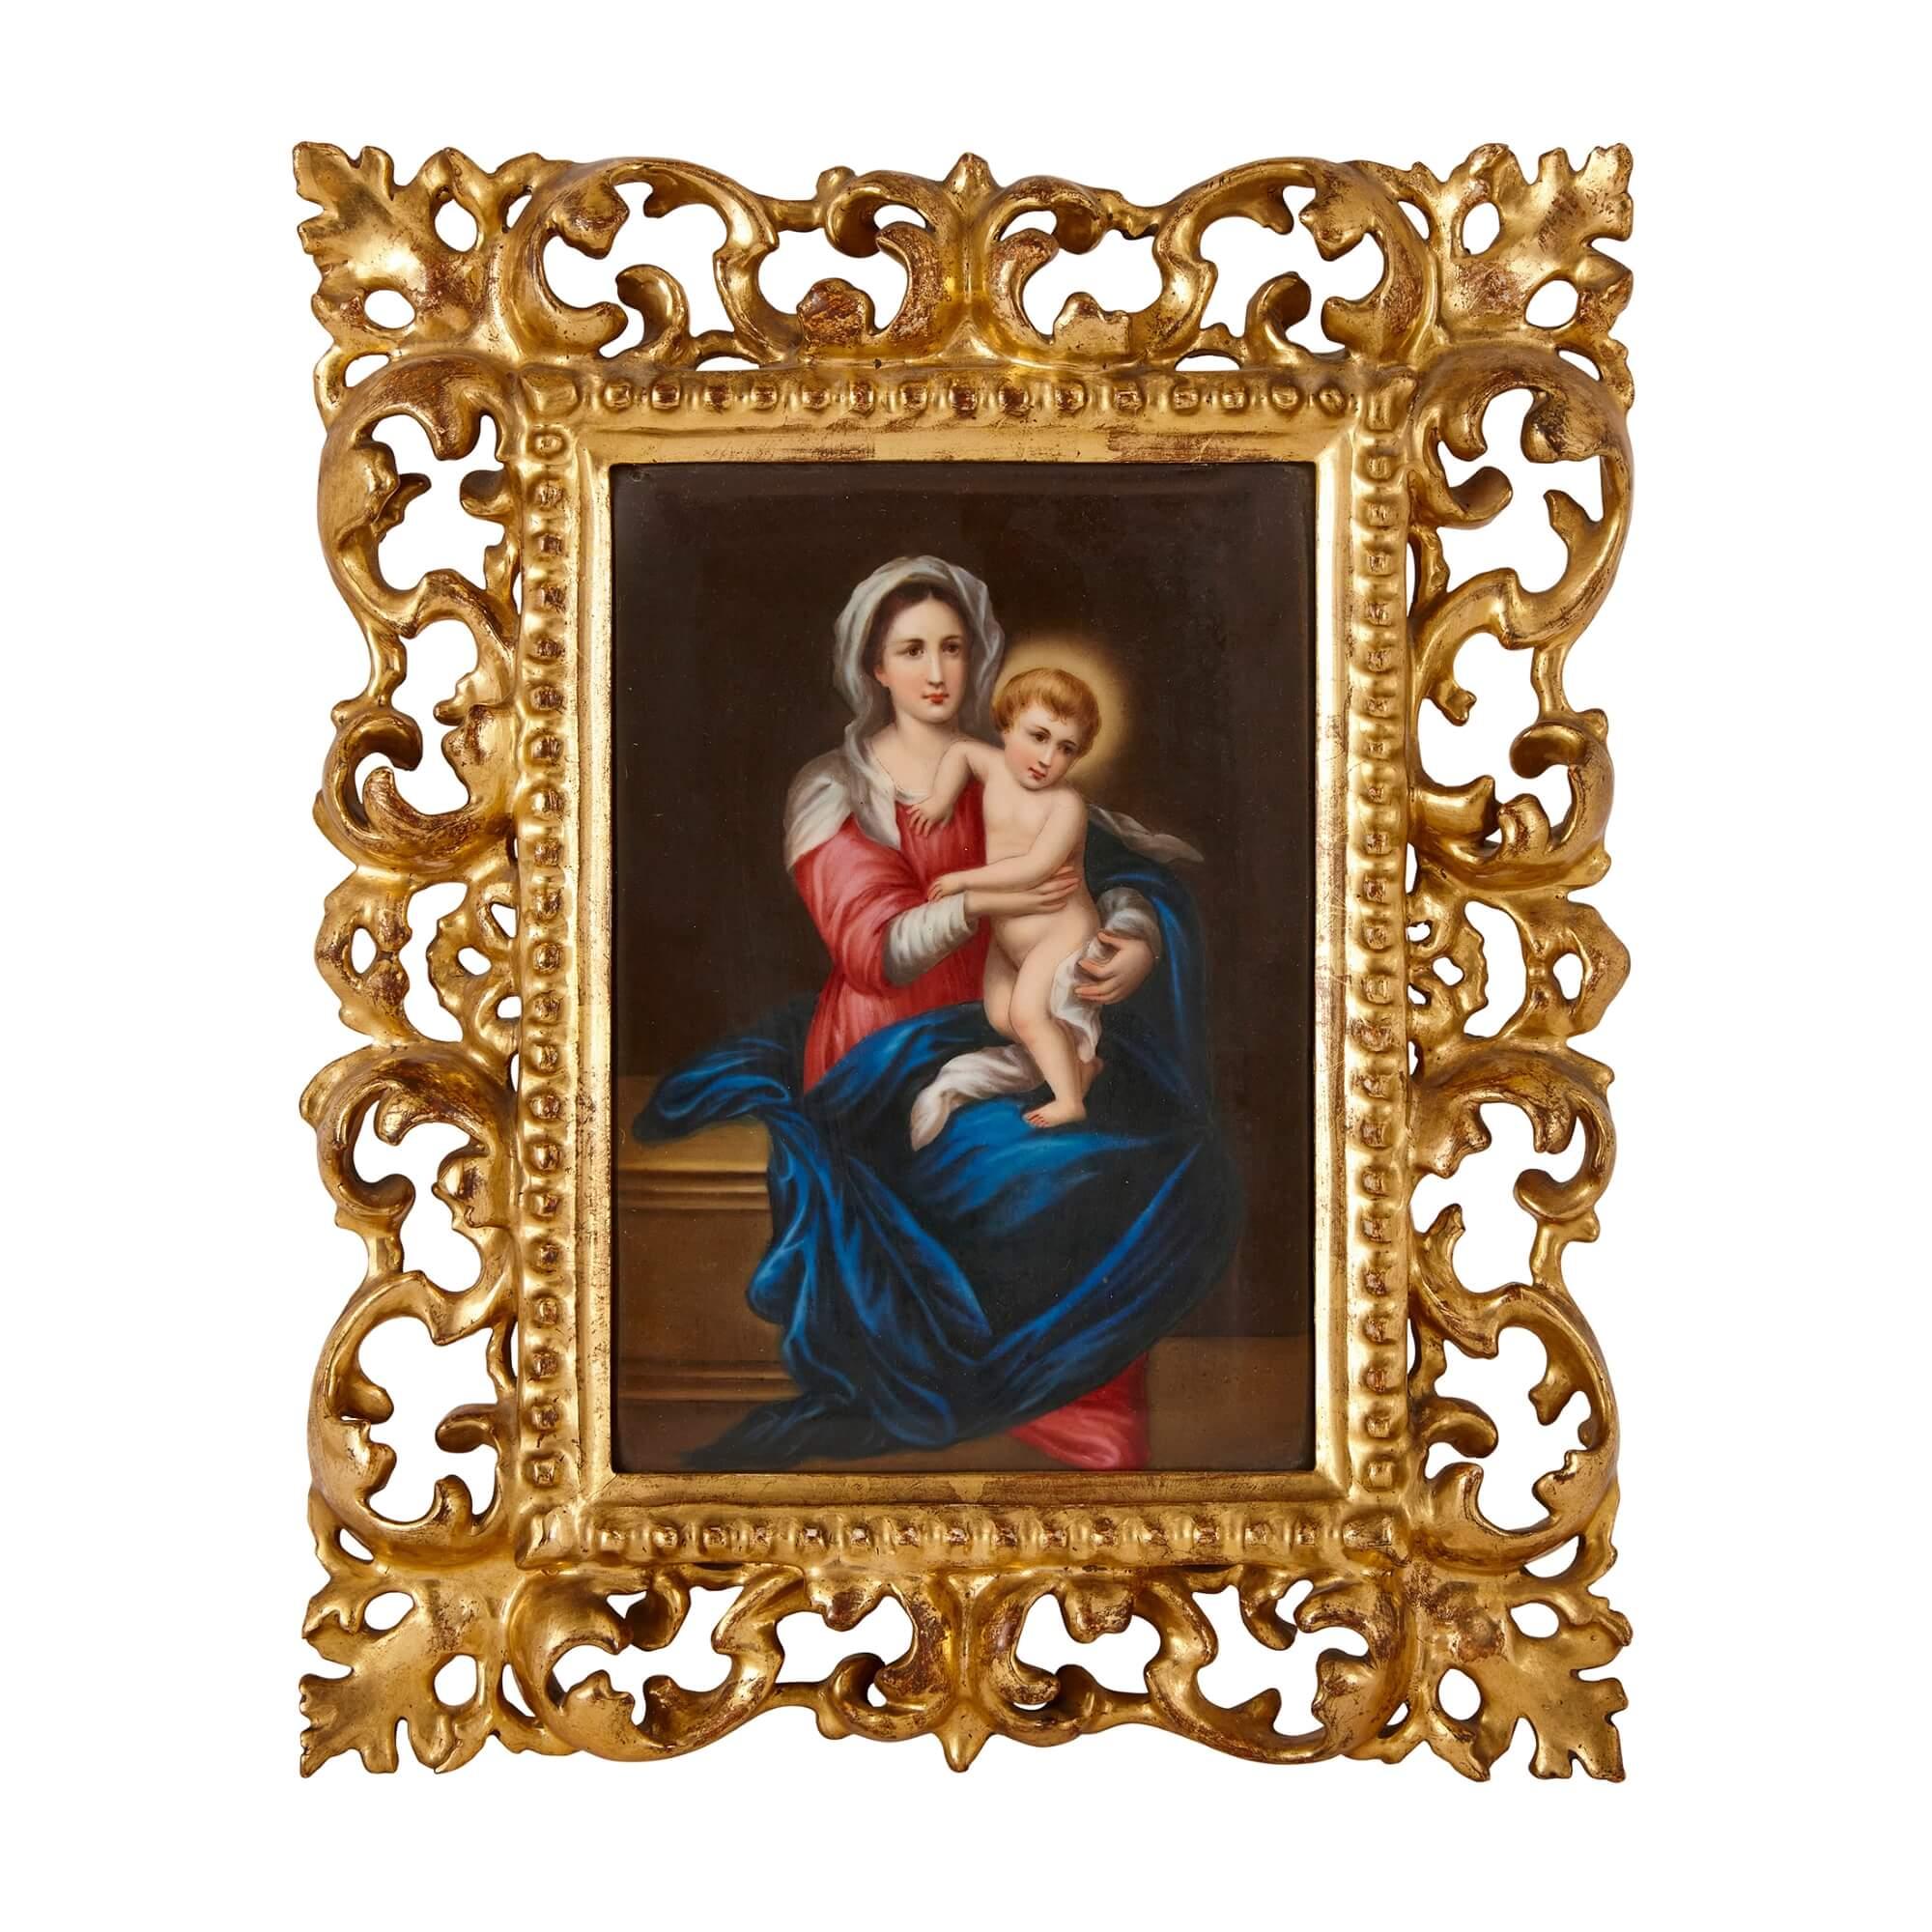 Pair of porcelain plaques in giltwood frames, after Old Master Madonnas
Italian, 1901
Measures: Frames: height 28cm, width 23cm, depth 2cm
Plaques: height 18cm, width 13cm, depth 0.5cm

Depicting a pair of Madonna and Child images after famous